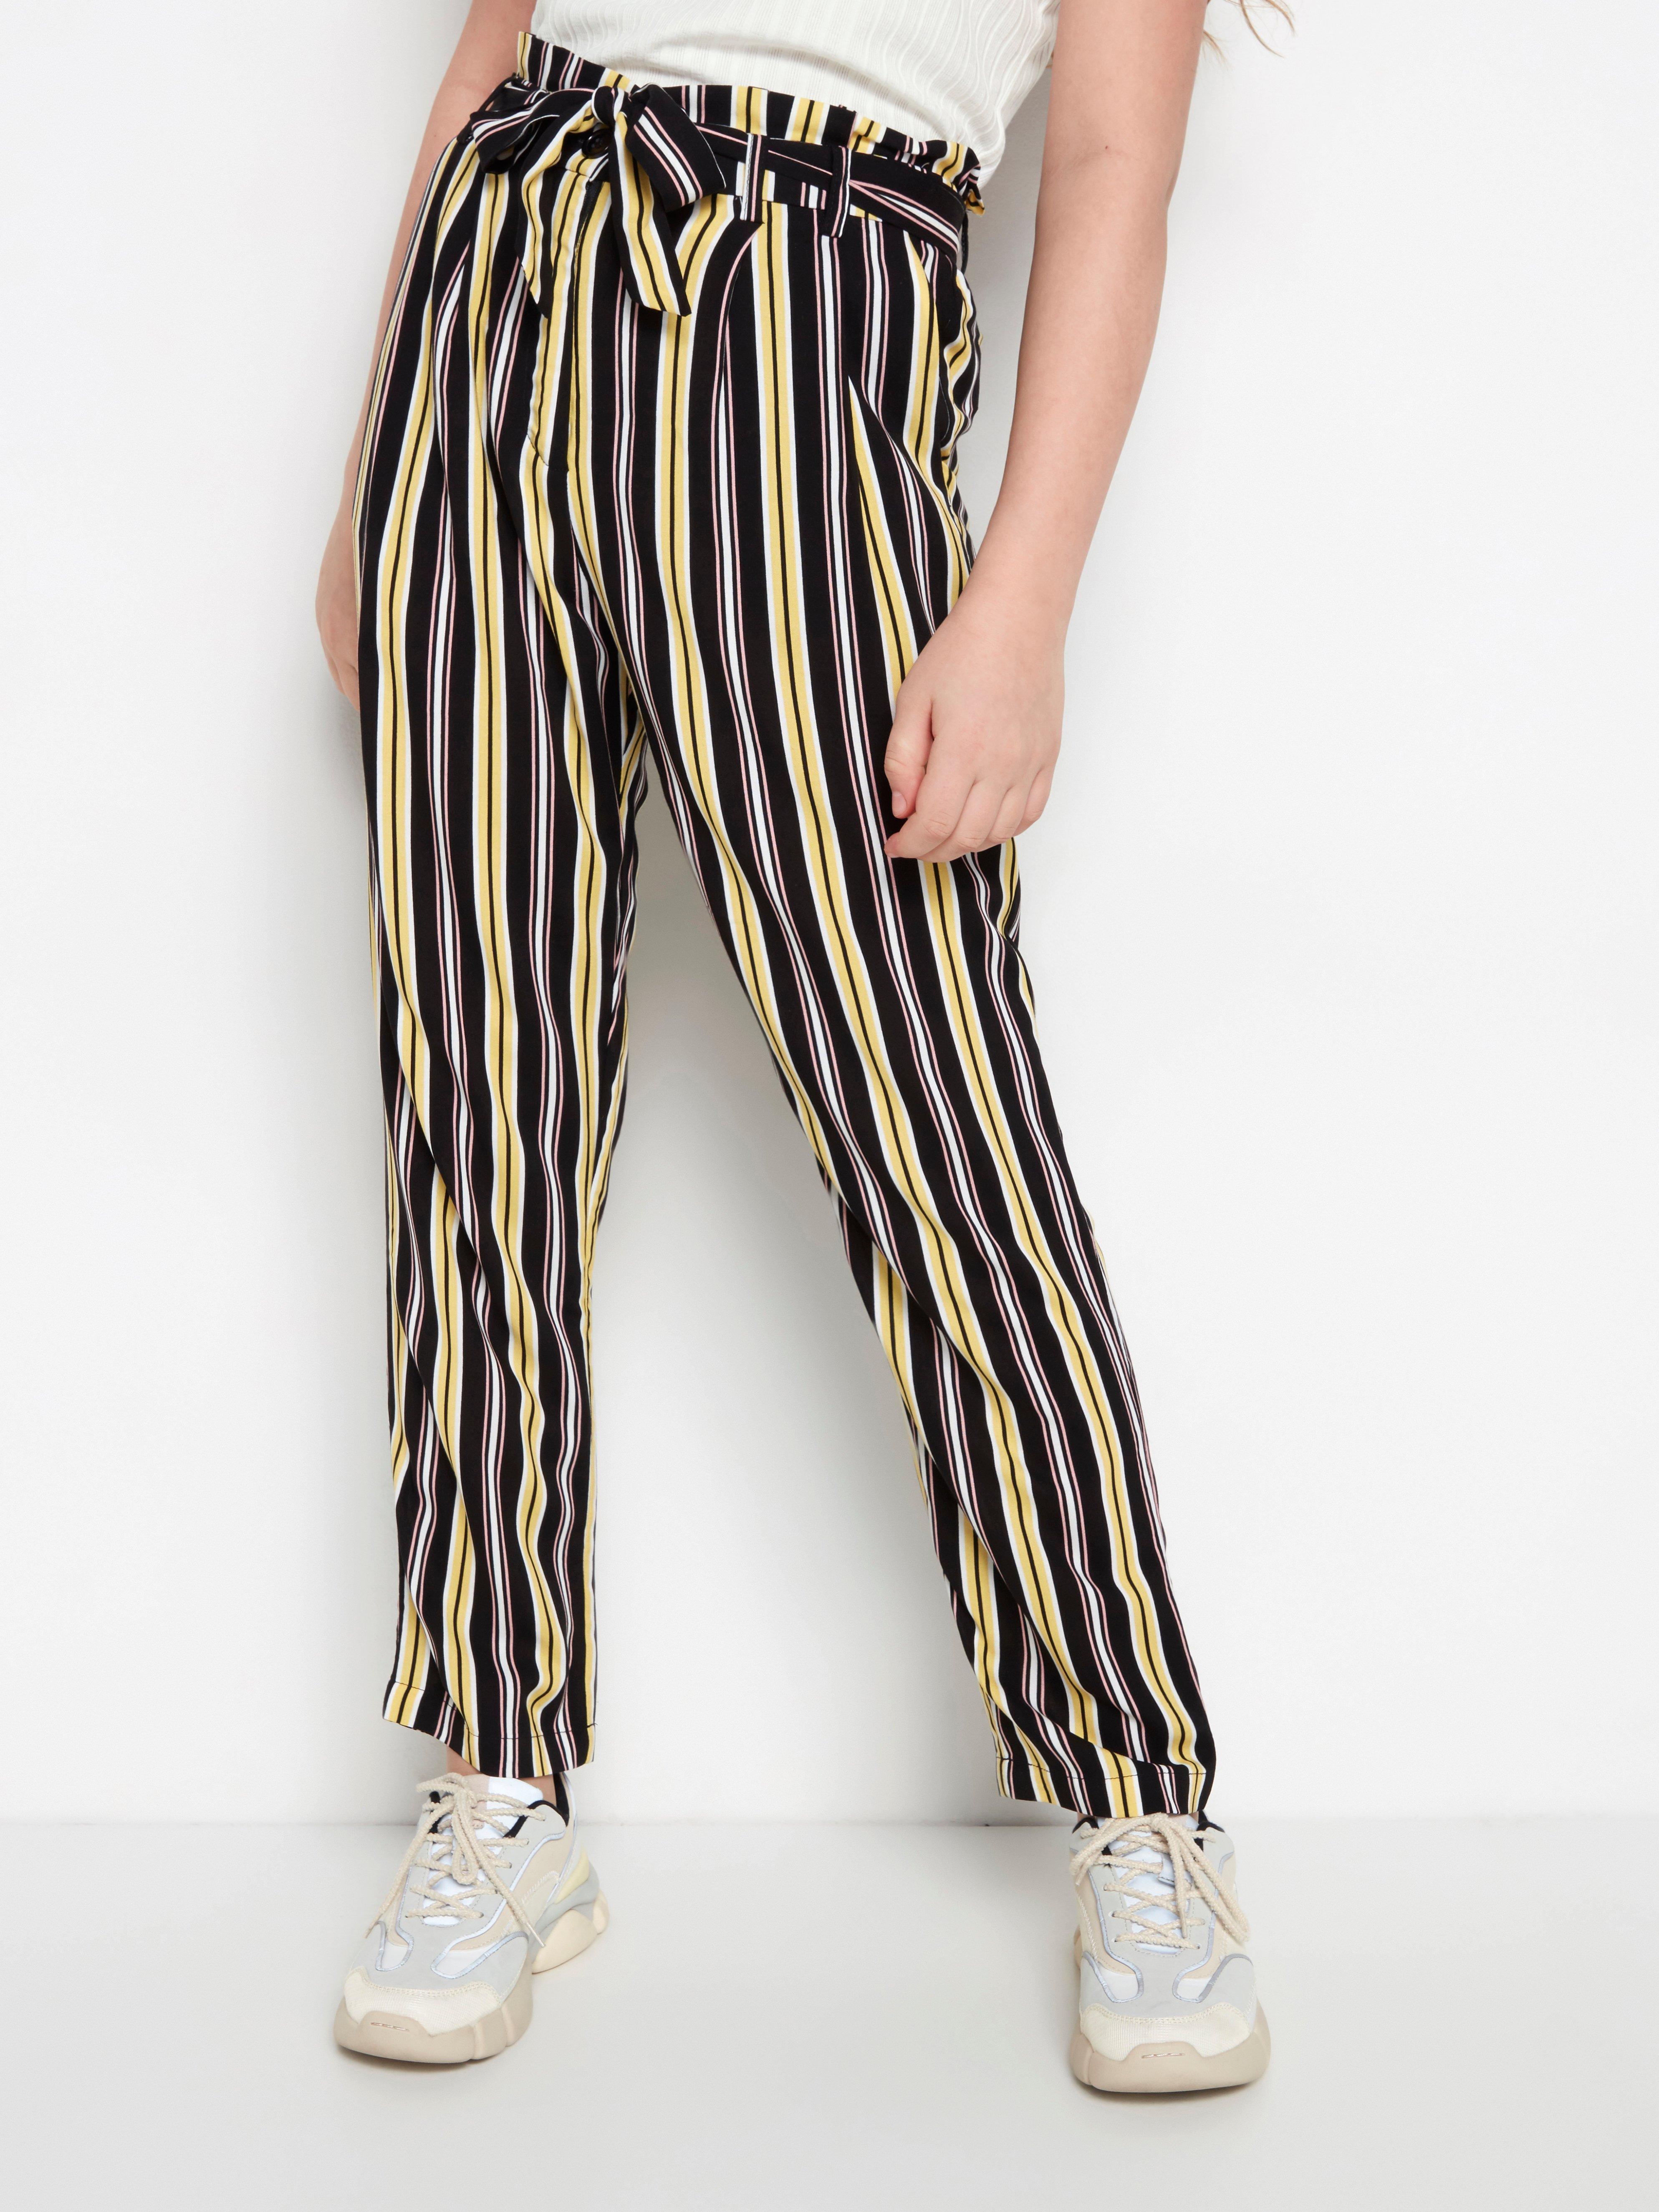 paperbag trousers striped